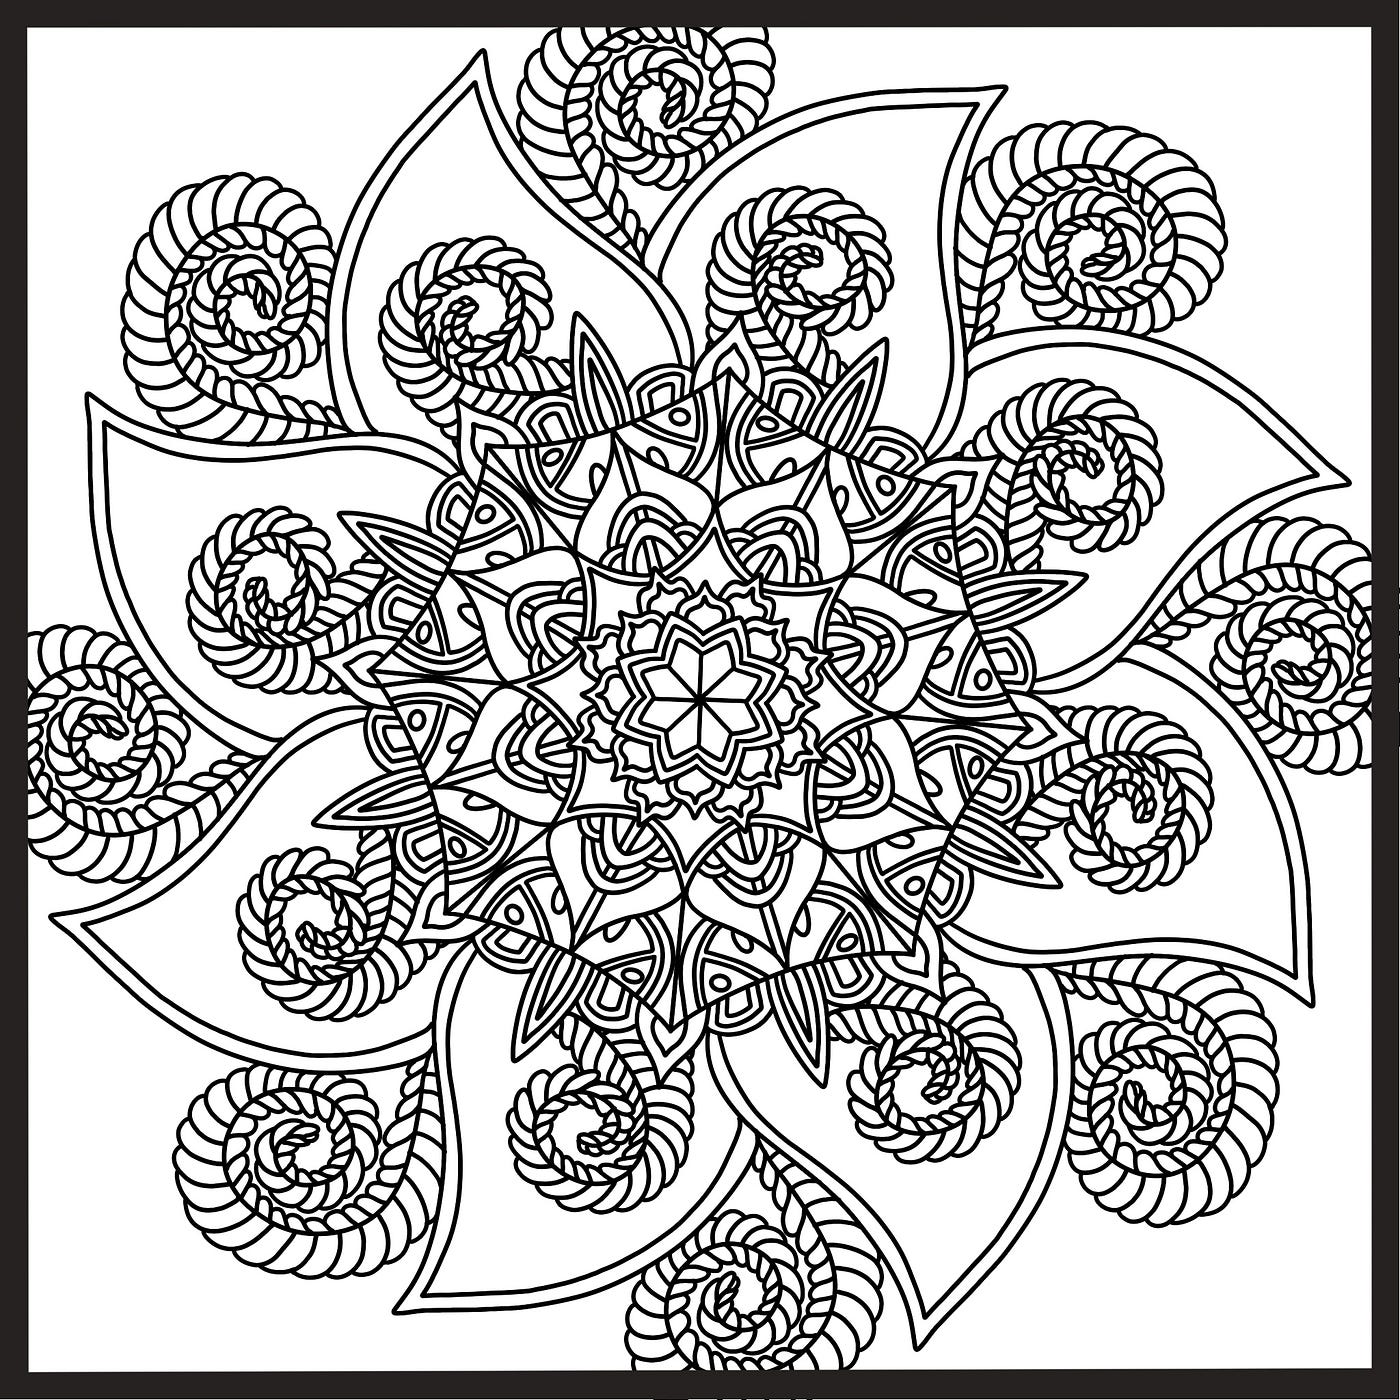 Color theory for adult coloring - Art Therapy Coloring